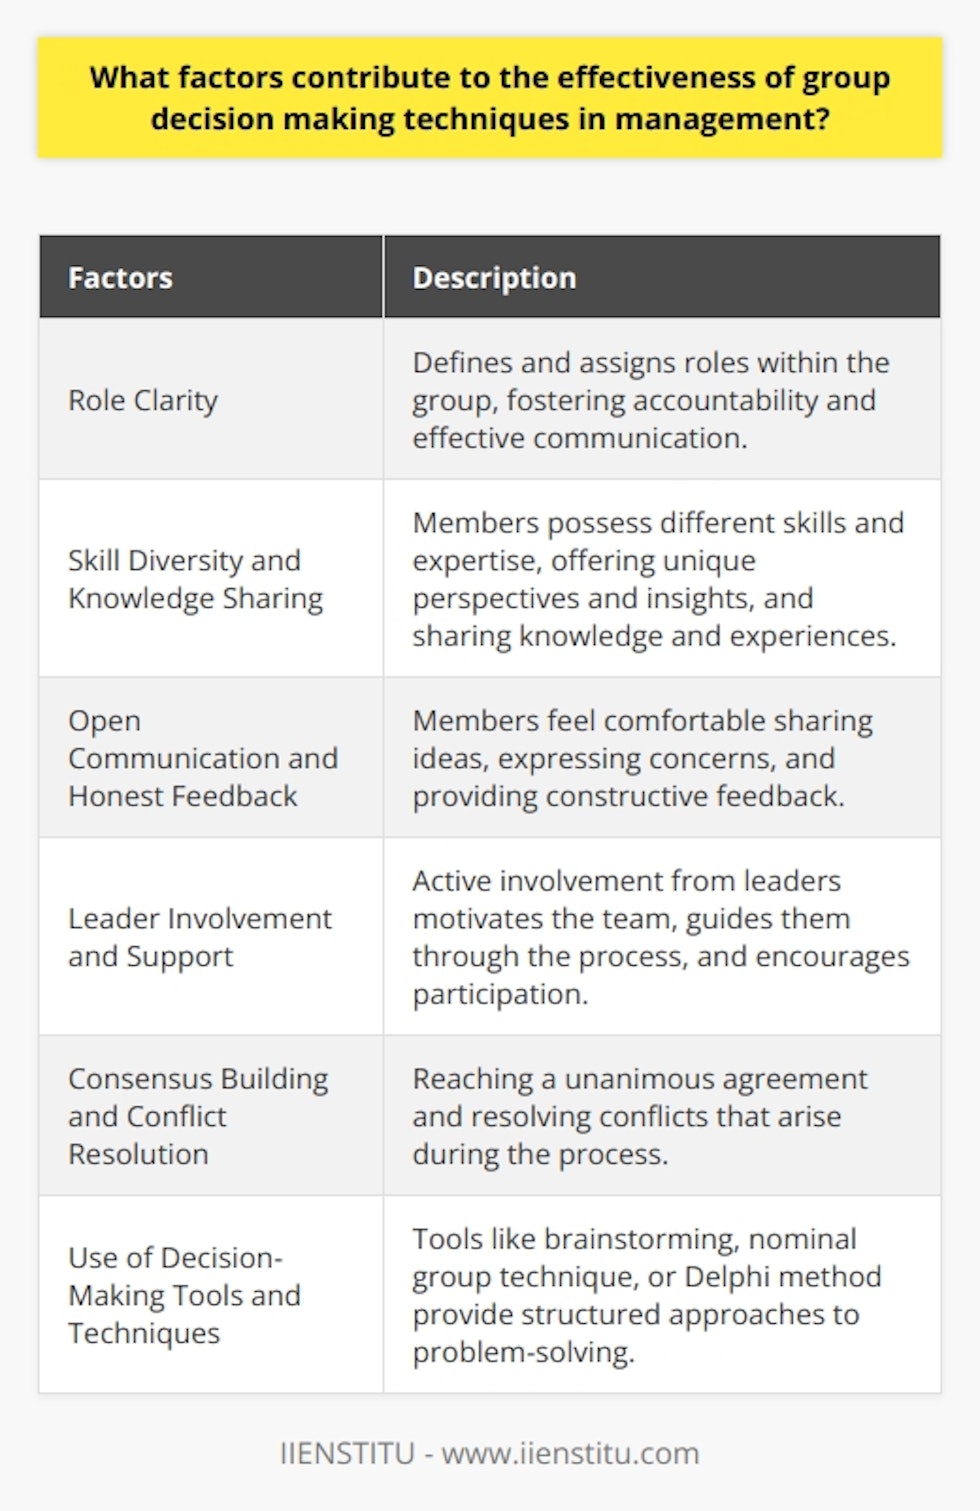 Factors contributing to the effectiveness of group decision-making techniques in management include role clarity, skill diversity and knowledge sharing, open communication and honest feedback, leader involvement and support, consensus building and conflict resolution, and the use of decision-making tools and techniques.Role clarity is important in group decision-making as it defines and assigns roles within the group. This fosters accountability, effective communication, and reduces conflicts, leading to enhanced decision-making performance.Skill diversity and knowledge sharing among group members contribute to effective group decision-making. When members possess different skills and expertise, they can offer unique perspectives and insights during the problem-solving process. Furthermore, sharing knowledge and experiences among group members enables them to make more informed decisions.Open communication and honest feedback play a crucial role in group decision-making. Members should feel comfortable sharing their ideas, expressing concerns, and providing constructive feedback. Promoting active listening and empathy within the group facilitates better understanding and collaboration, leading to improved decision-making outcomes.Leader involvement and support significantly enhance the effectiveness of group decision-making. Active involvement from leaders motivates the team, guides them through the decision-making process, and offers the final decision when necessary. Effective leaders also encourage participation from all members, manage conflicts, and set a collaborative tone.Consensus building and conflict resolution are essential in group decision-making. Reaching a unanimous agreement ensures that every member's voice is heard and considered. Resolving conflicts that arise during the decision-making process helps maintain group cohesion and fosters collaboration.Using decision-making tools and techniques enhances the effectiveness of group decision-making. Tools such as brainstorming, nominal group technique, or Delphi method provide systematic and structured approaches to problem-solving. These tools help groups identify problems, analyze options, and reach decisions more efficiently.In conclusion, role clarity, skill diversity, open communication, leader involvement, consensus building, and the use of decision-making tools and techniques are essential factors contributing to the effectiveness of group decision-making techniques in management. These factors enable groups to make informed and collaborative decisions, ultimately leading to better outcomes.